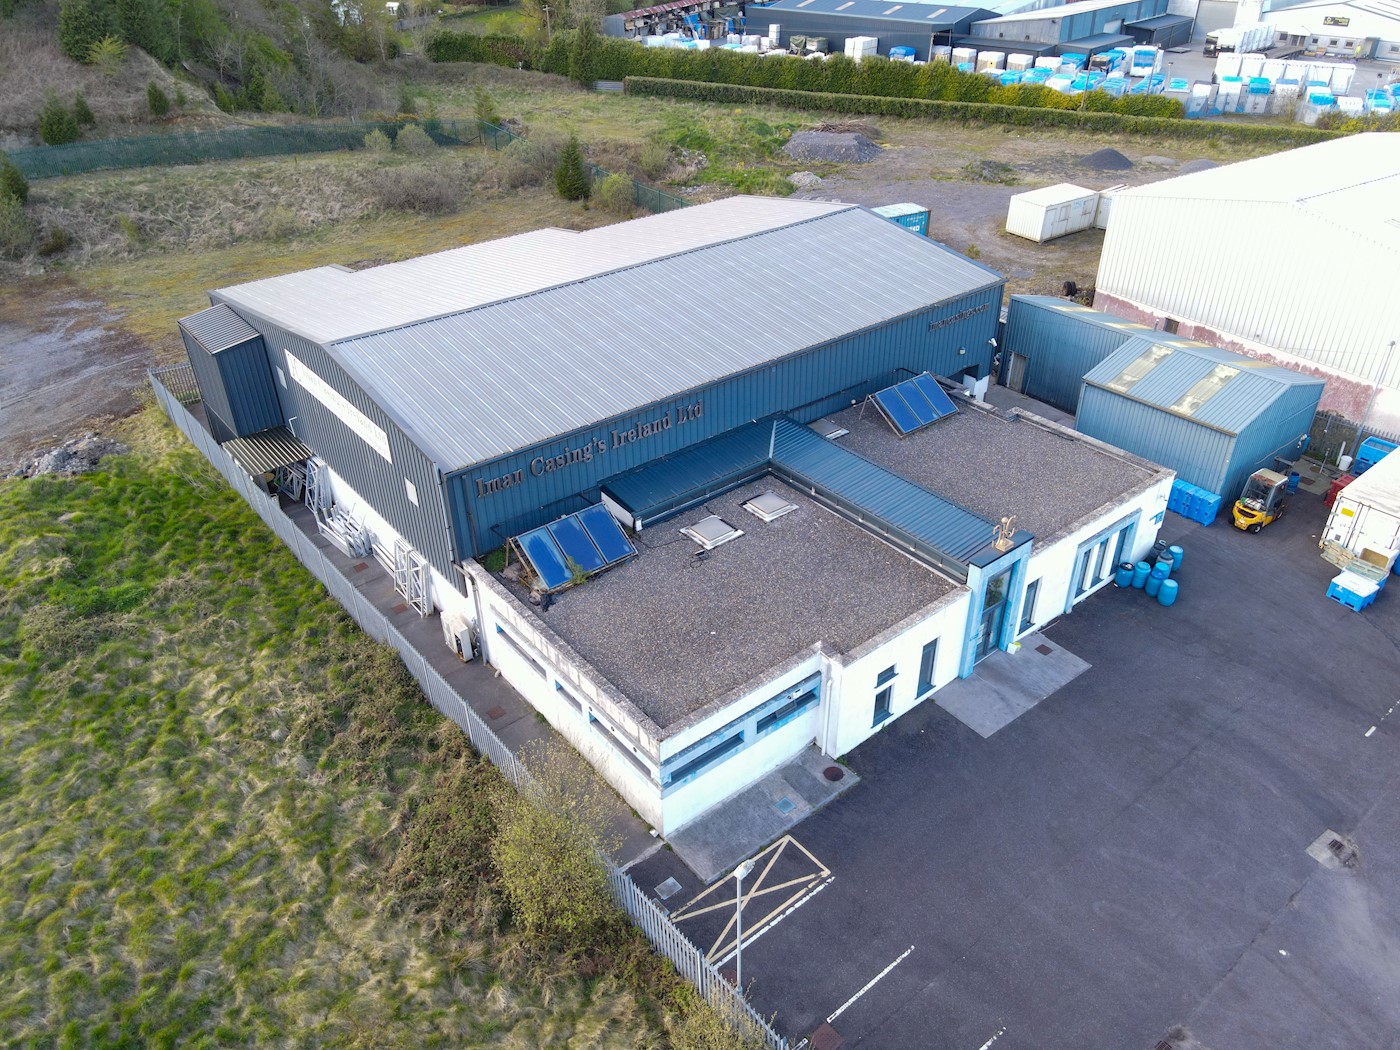 Industrial Premises at Clare Road, Ballyhaunis, Co. Mayo 1/3